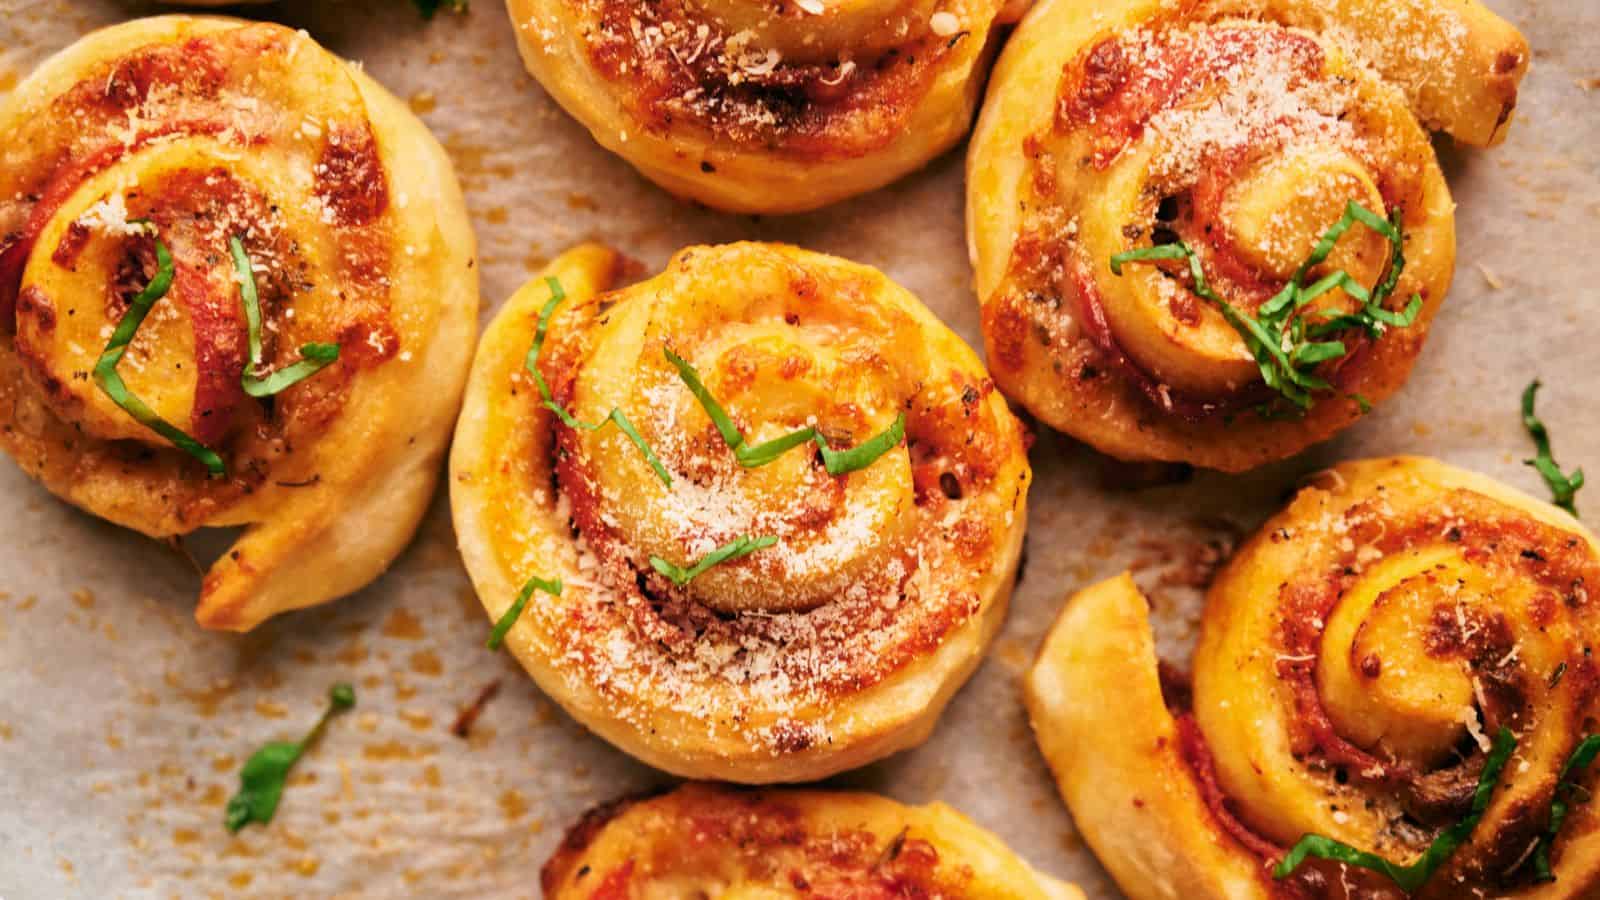 <p>Say goodbye to frozen    pizza   rolls and hello to our Air Fryer    Pizza   Rolls. They’re quick, hot, and bursting with flavor, making you forget about Wednesday takeout for good.<br><strong>Get the Recipe: </strong><a href="https://www.splashoftaste.com/homemade-pizza-rolls-in-the-air-fryer/?utm_source=msn&utm_medium=page&utm_campaign=msn">Air Fryer Pizza Rolls</a></p>